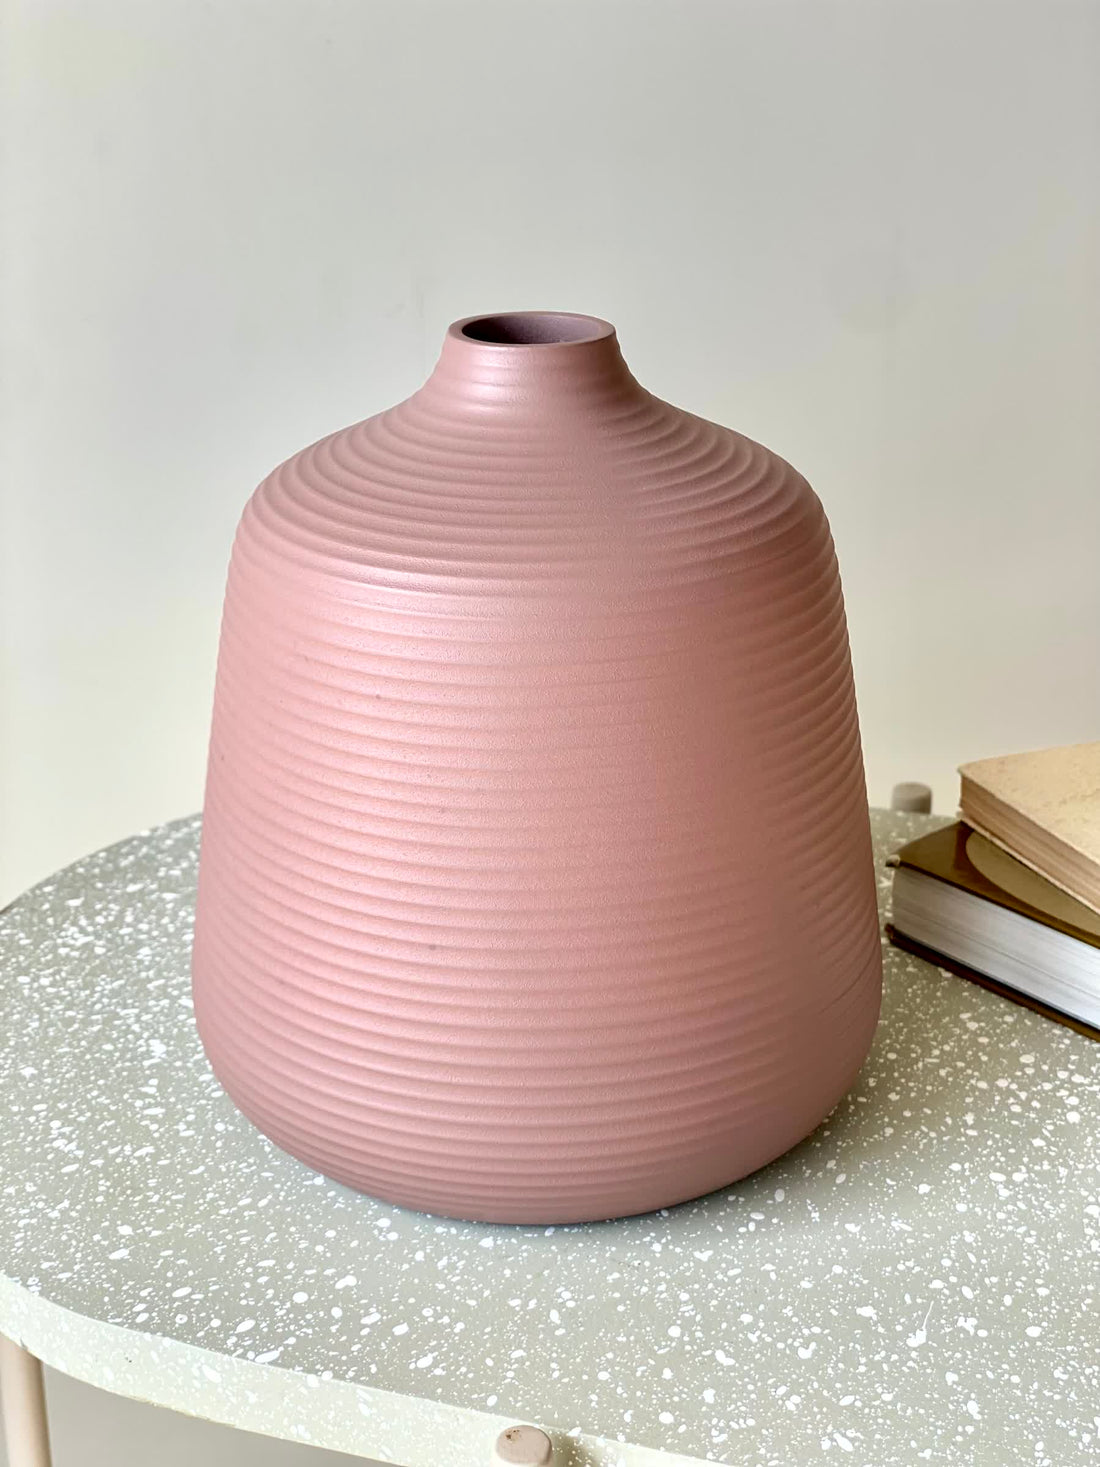 Amphora Coiled Vase Small - Rusty Pink